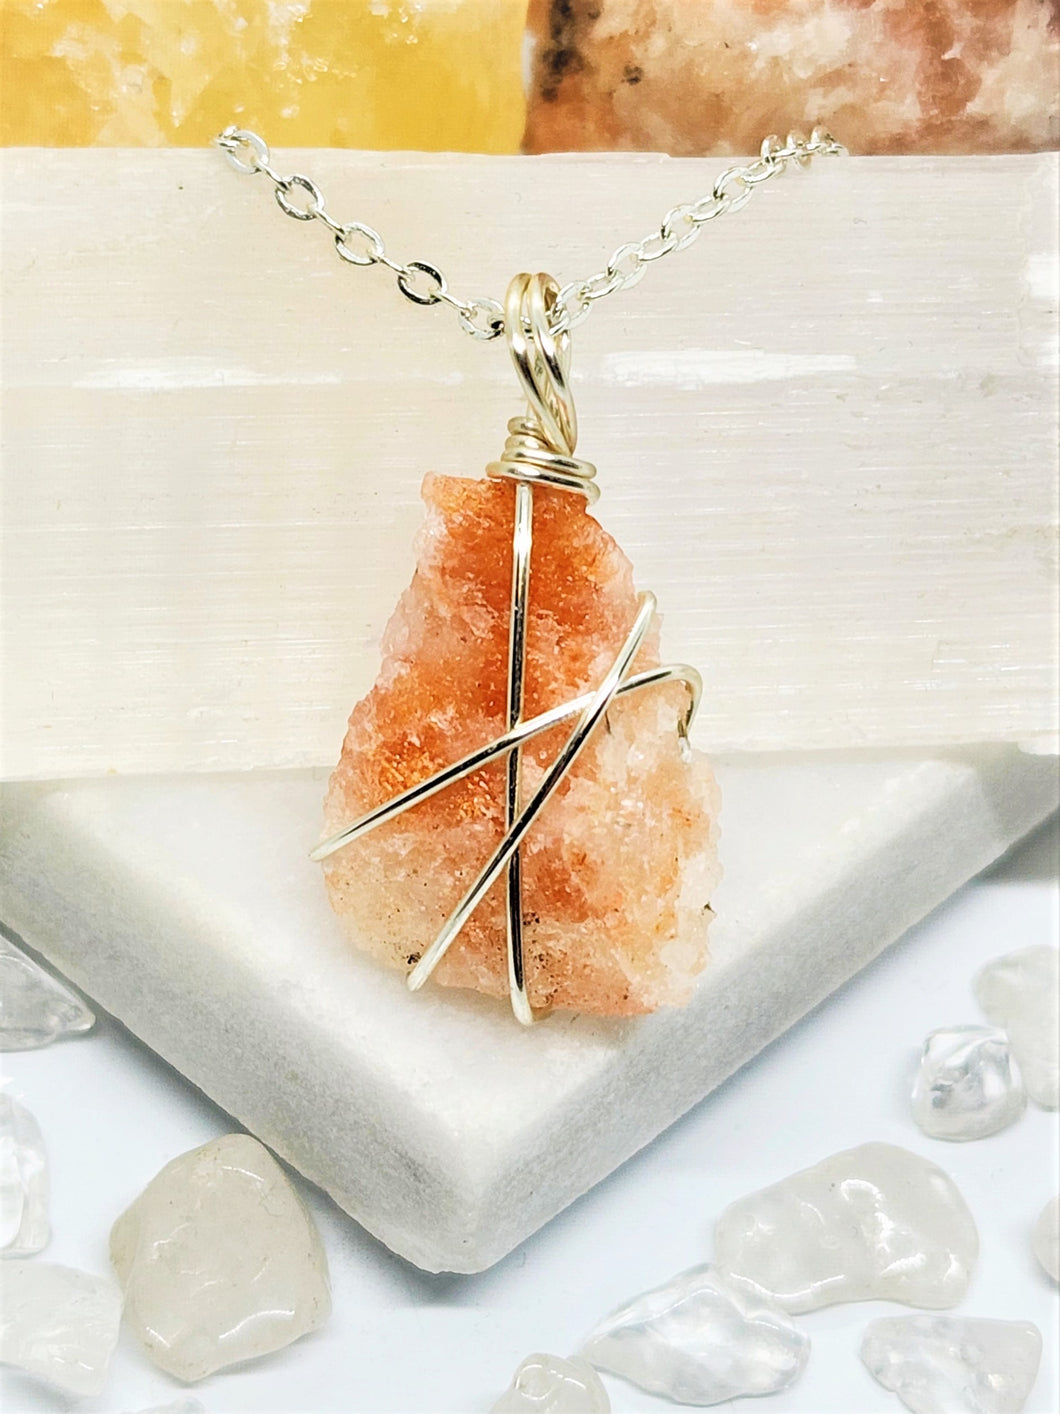 Ignite your inner radiance with Sunstone, a gemstone that fuels optimism and spiritual growth. Elevate your journey and shine brighter with Sunstone's transformative power